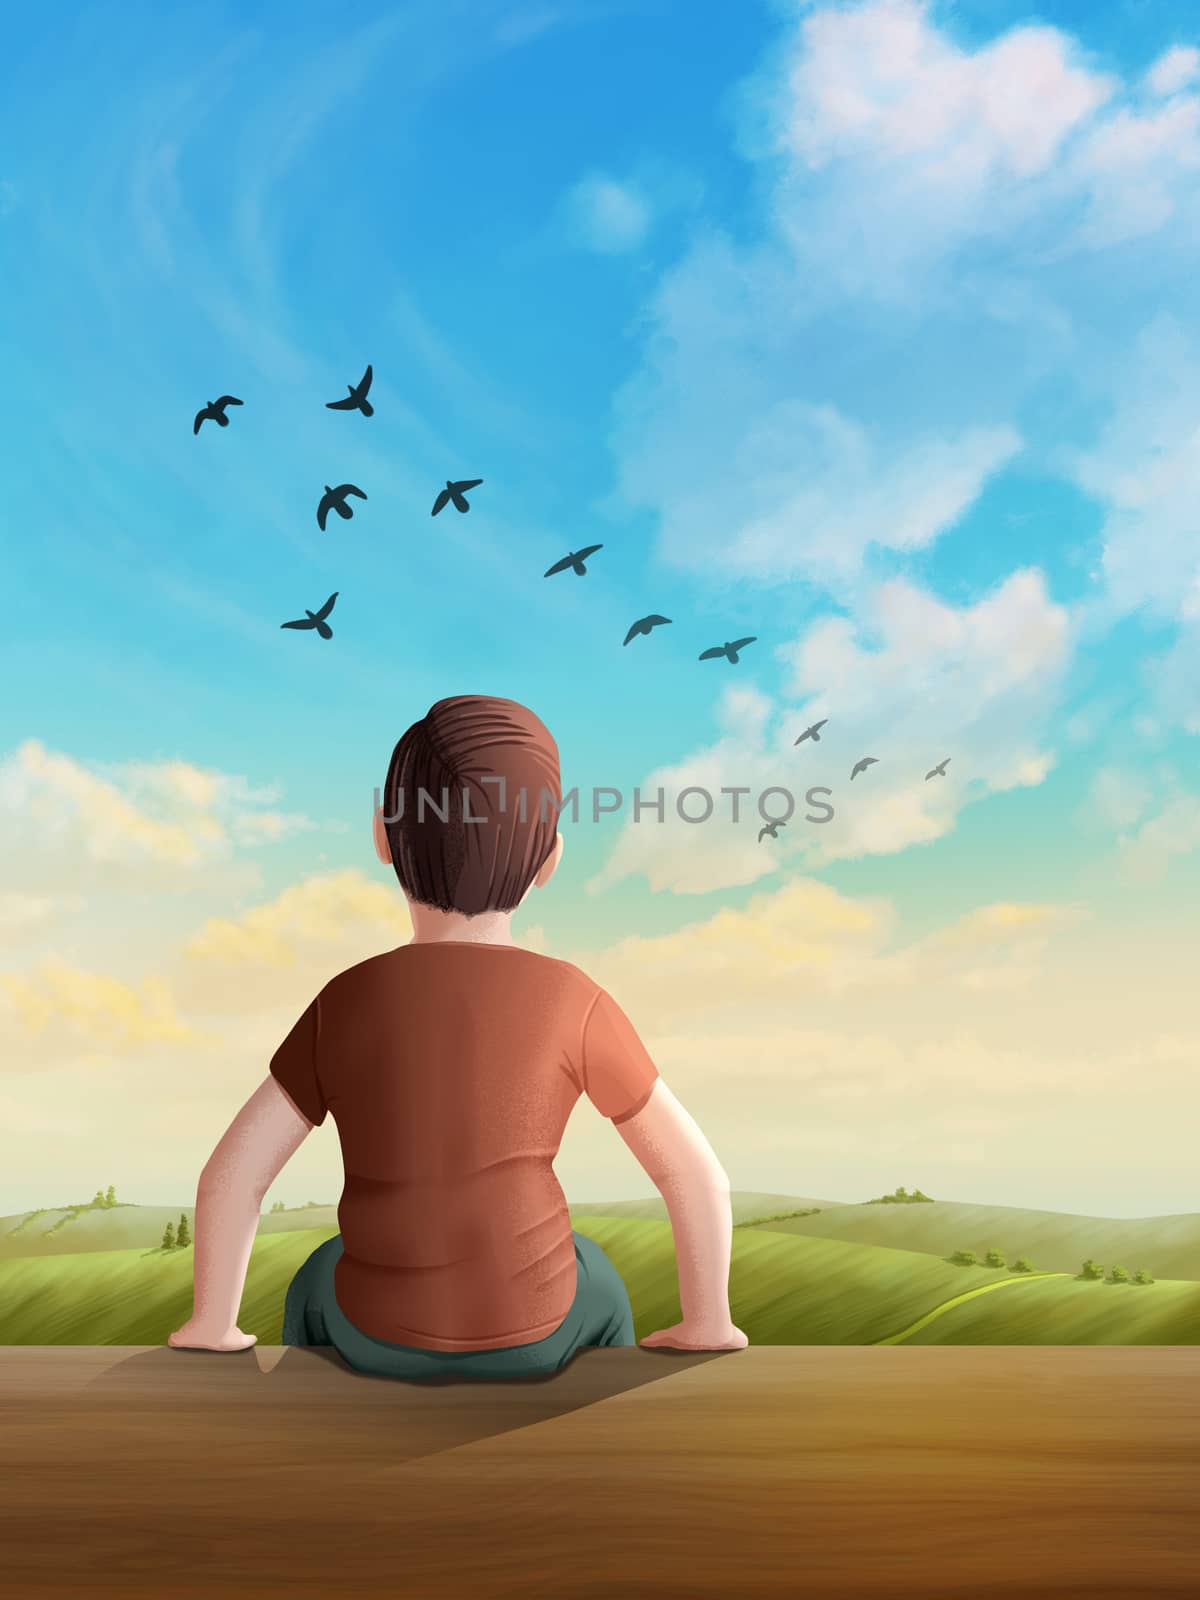 Children looking into a serene, sunny landscape, with birds flying through the sky. Digital illustration.